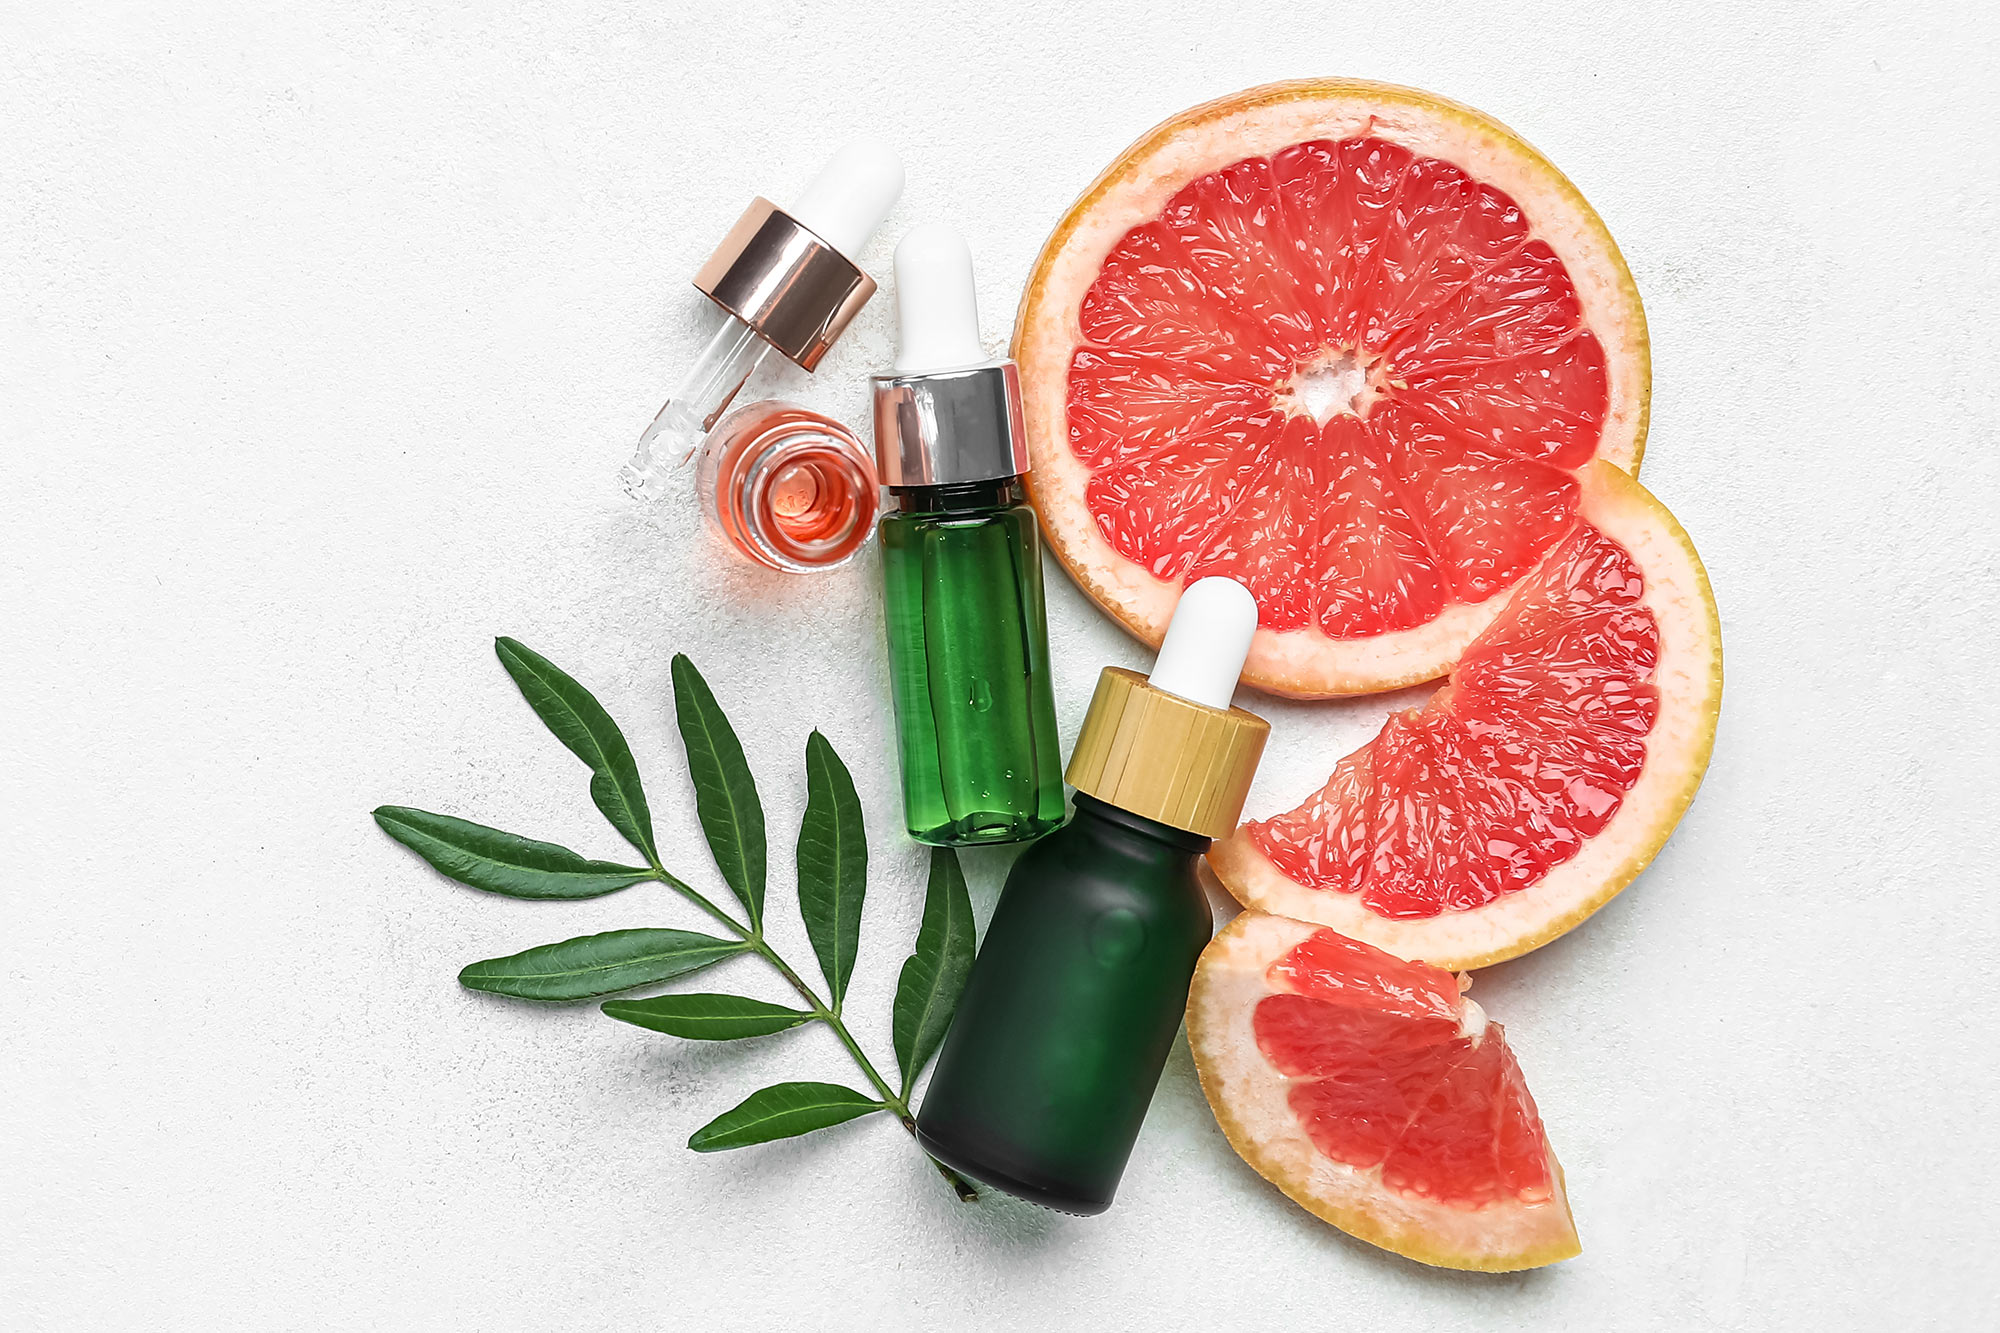 Essential oil bottles with closures and orange pieces